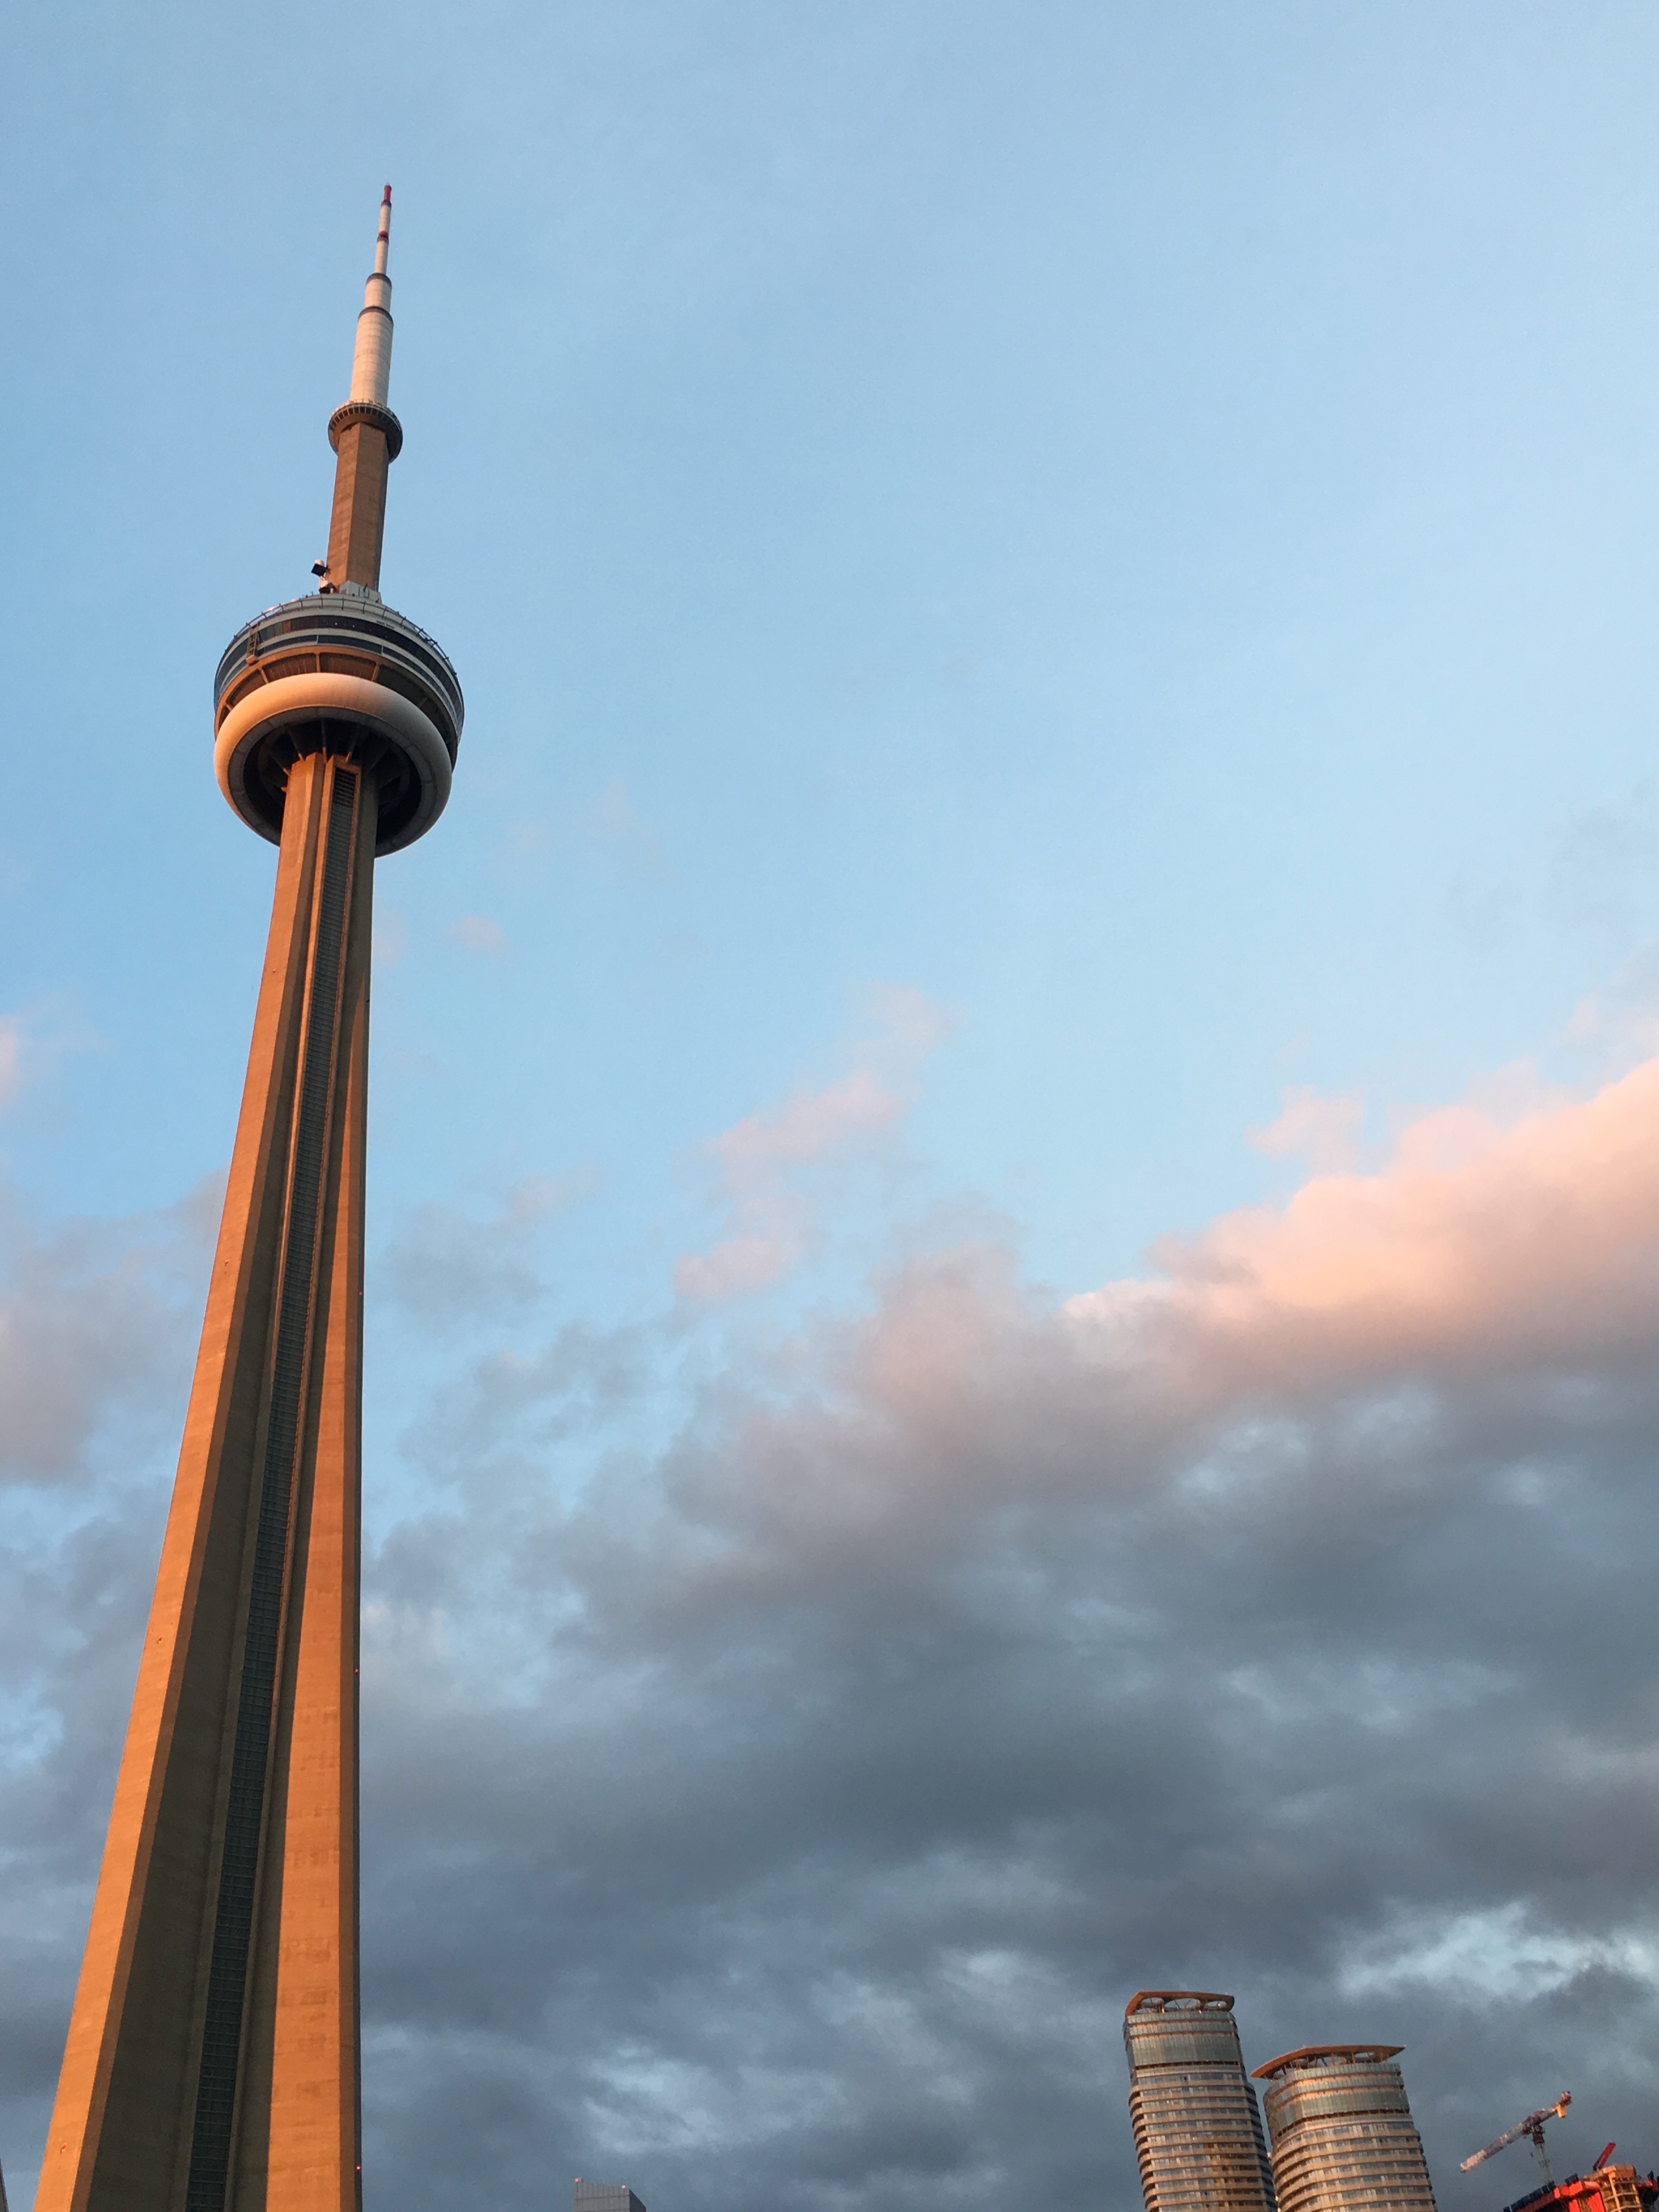 The CN Tower at dusk